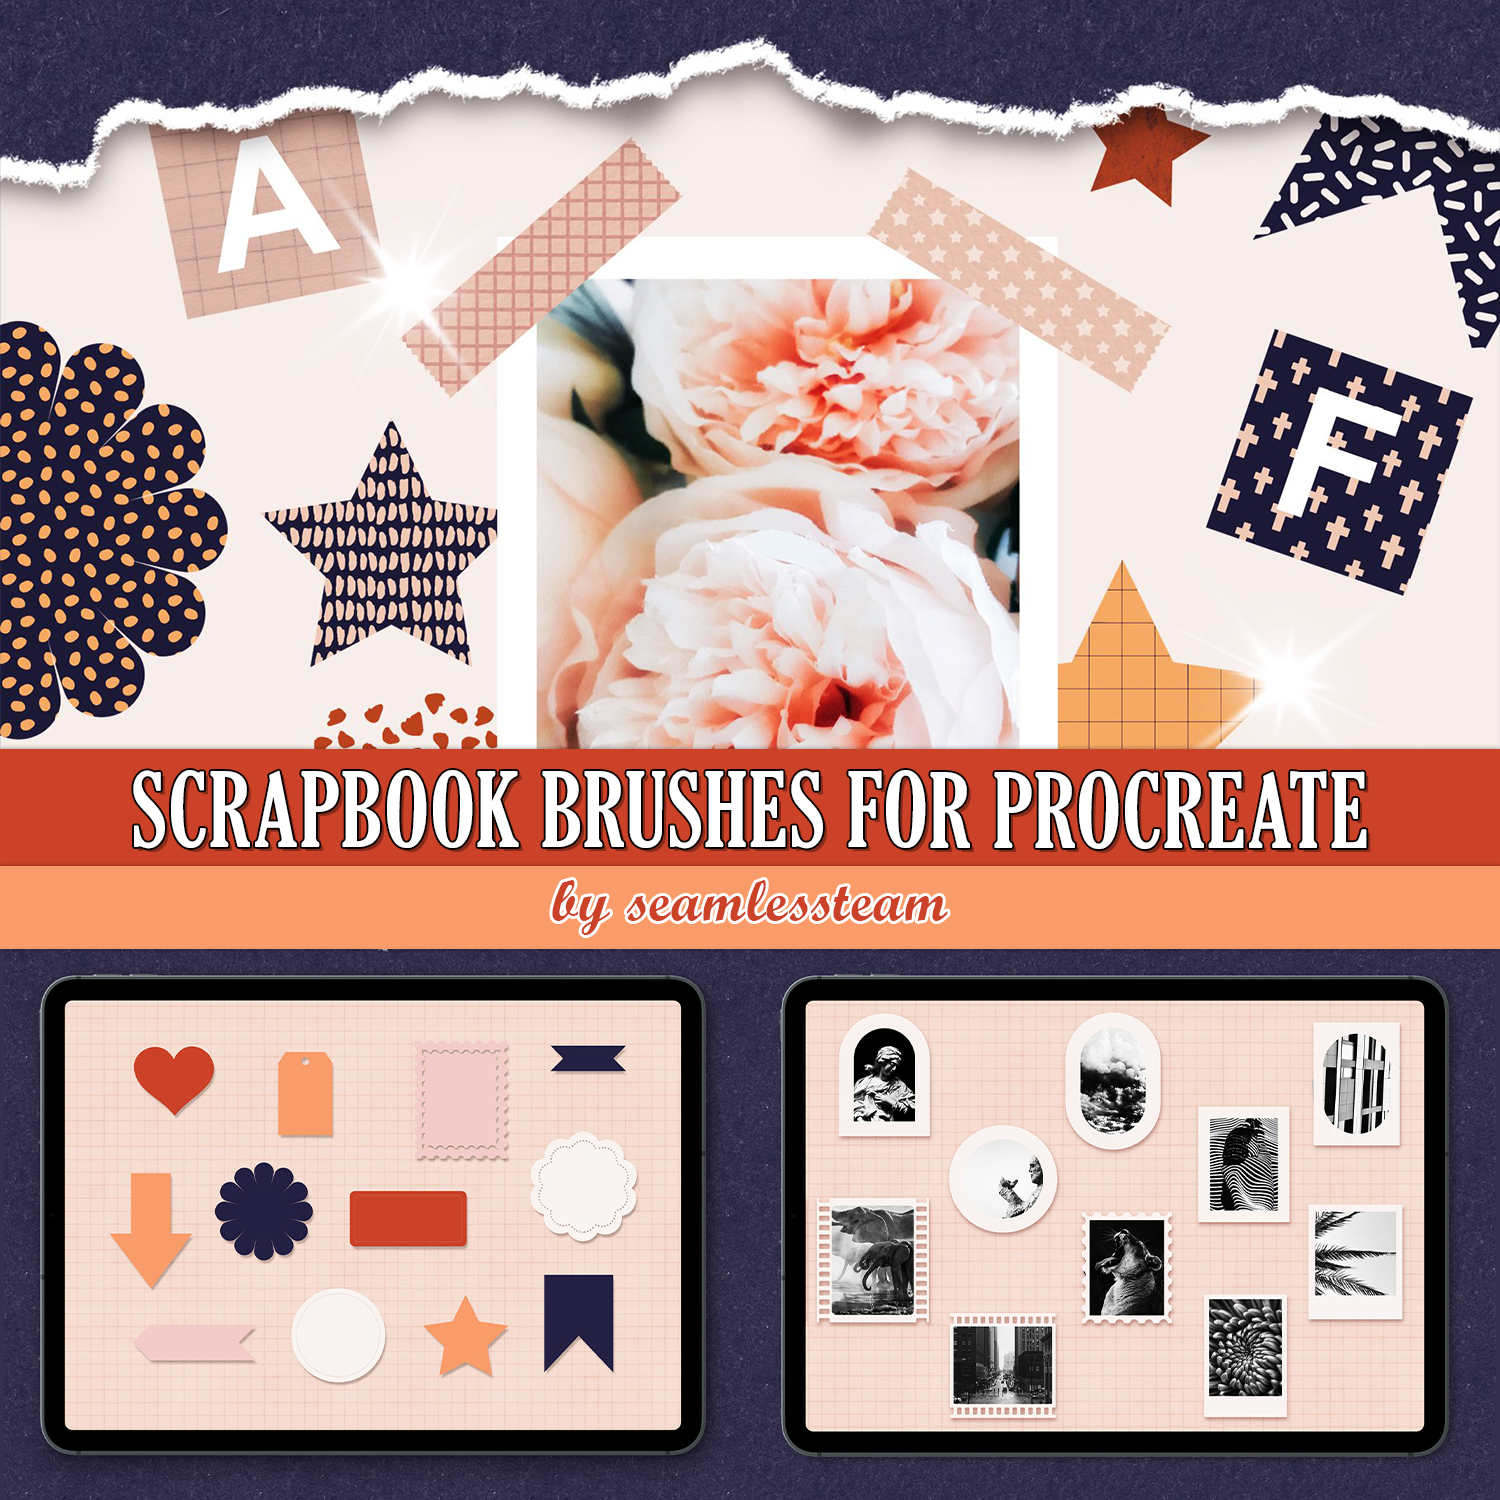 Preview scrapbook brushes for procreate.